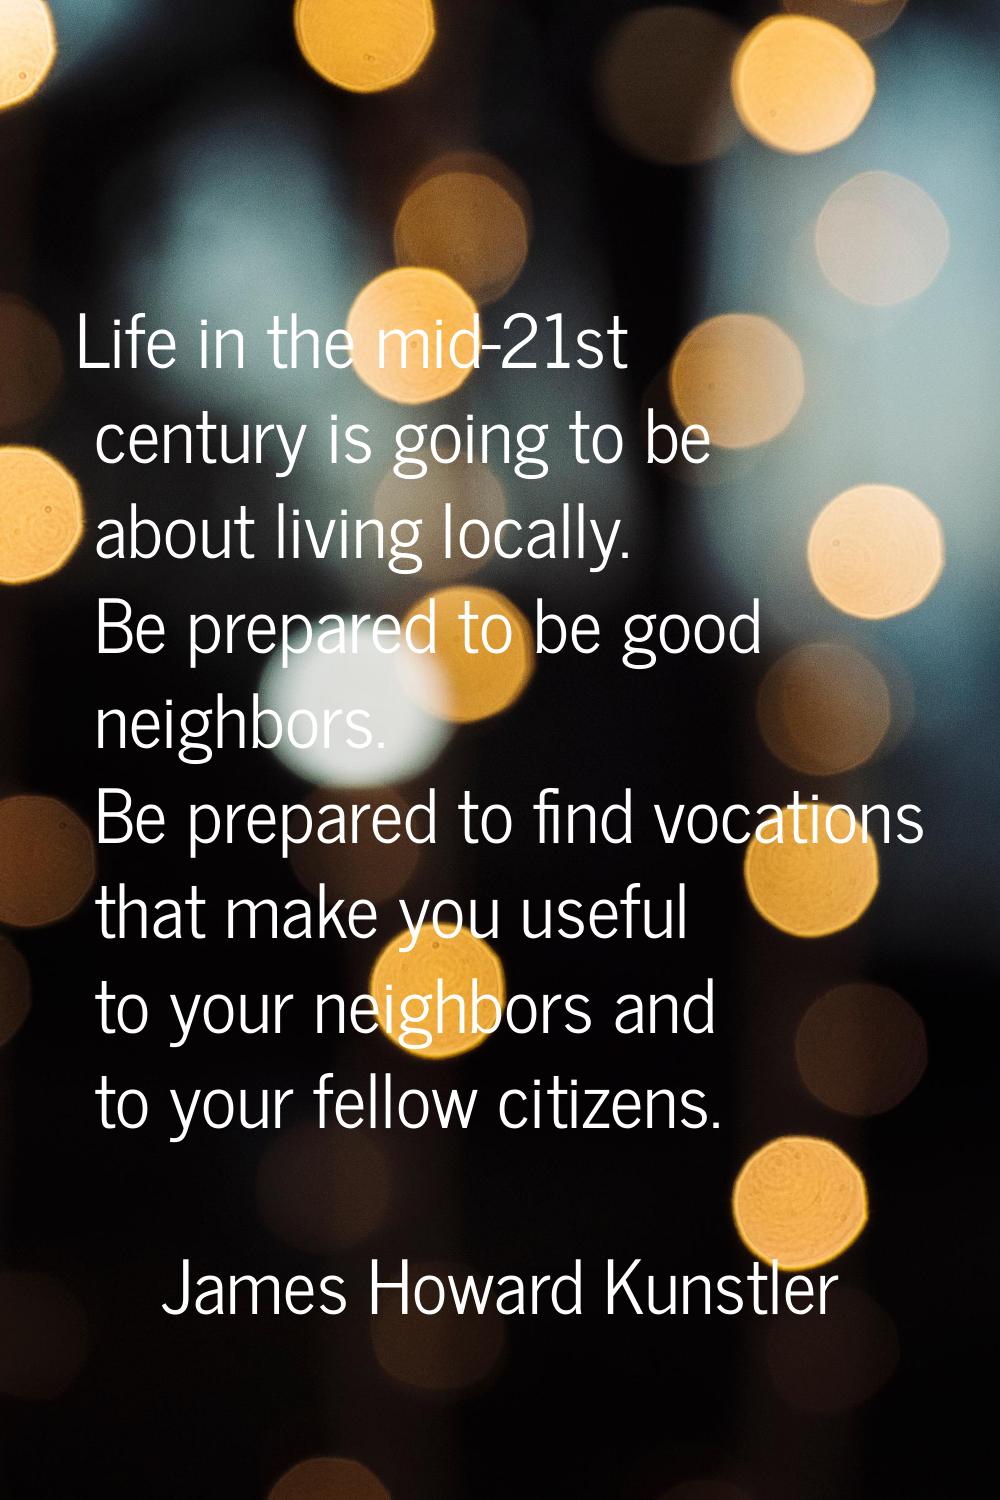 Life in the mid-21st century is going to be about living locally. Be prepared to be good neighbors.